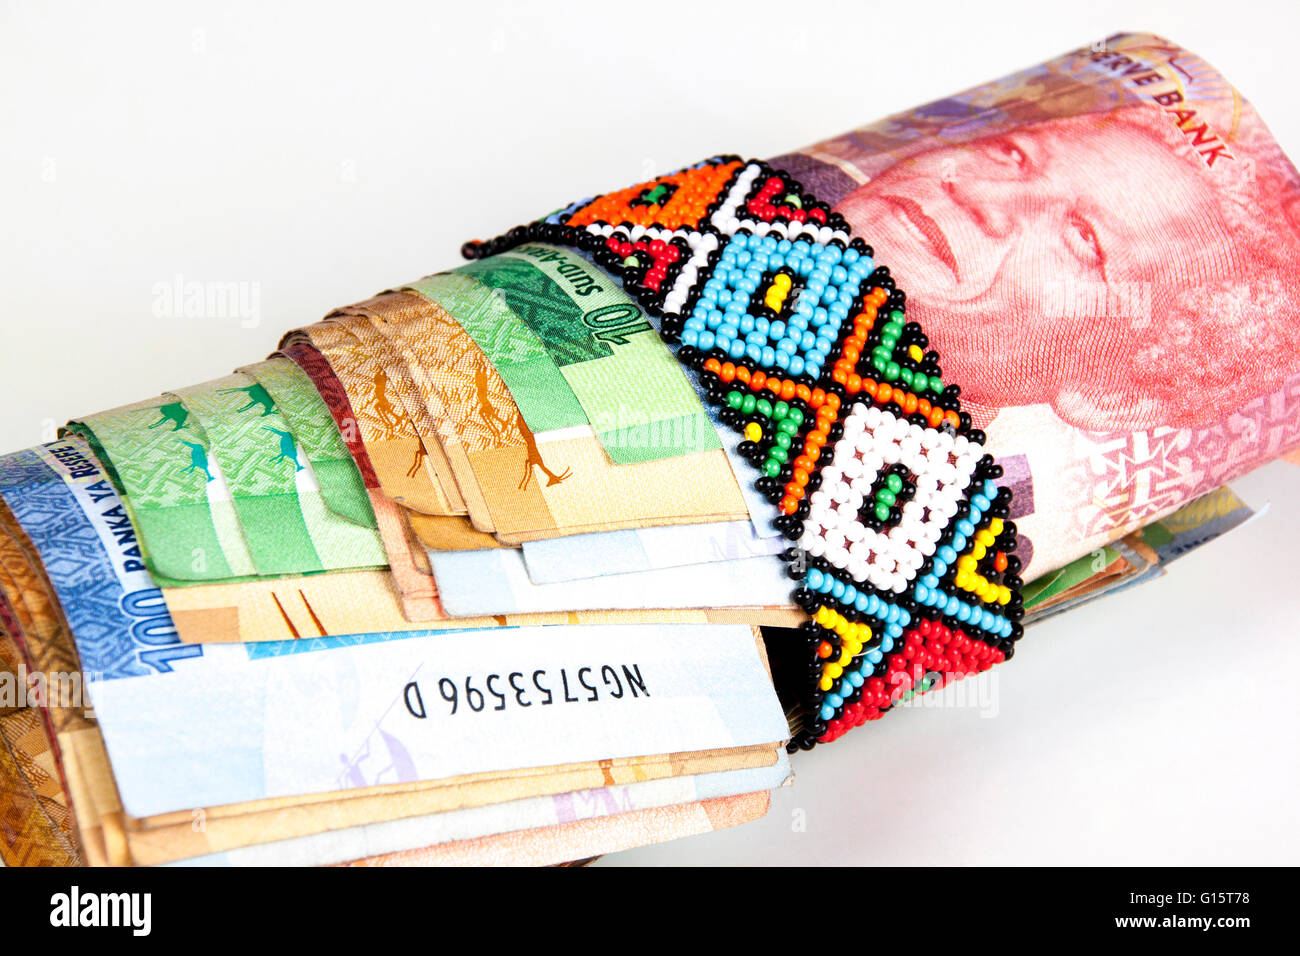 Roll of south African banknotes secured with band of Zulu beads Stock Photo